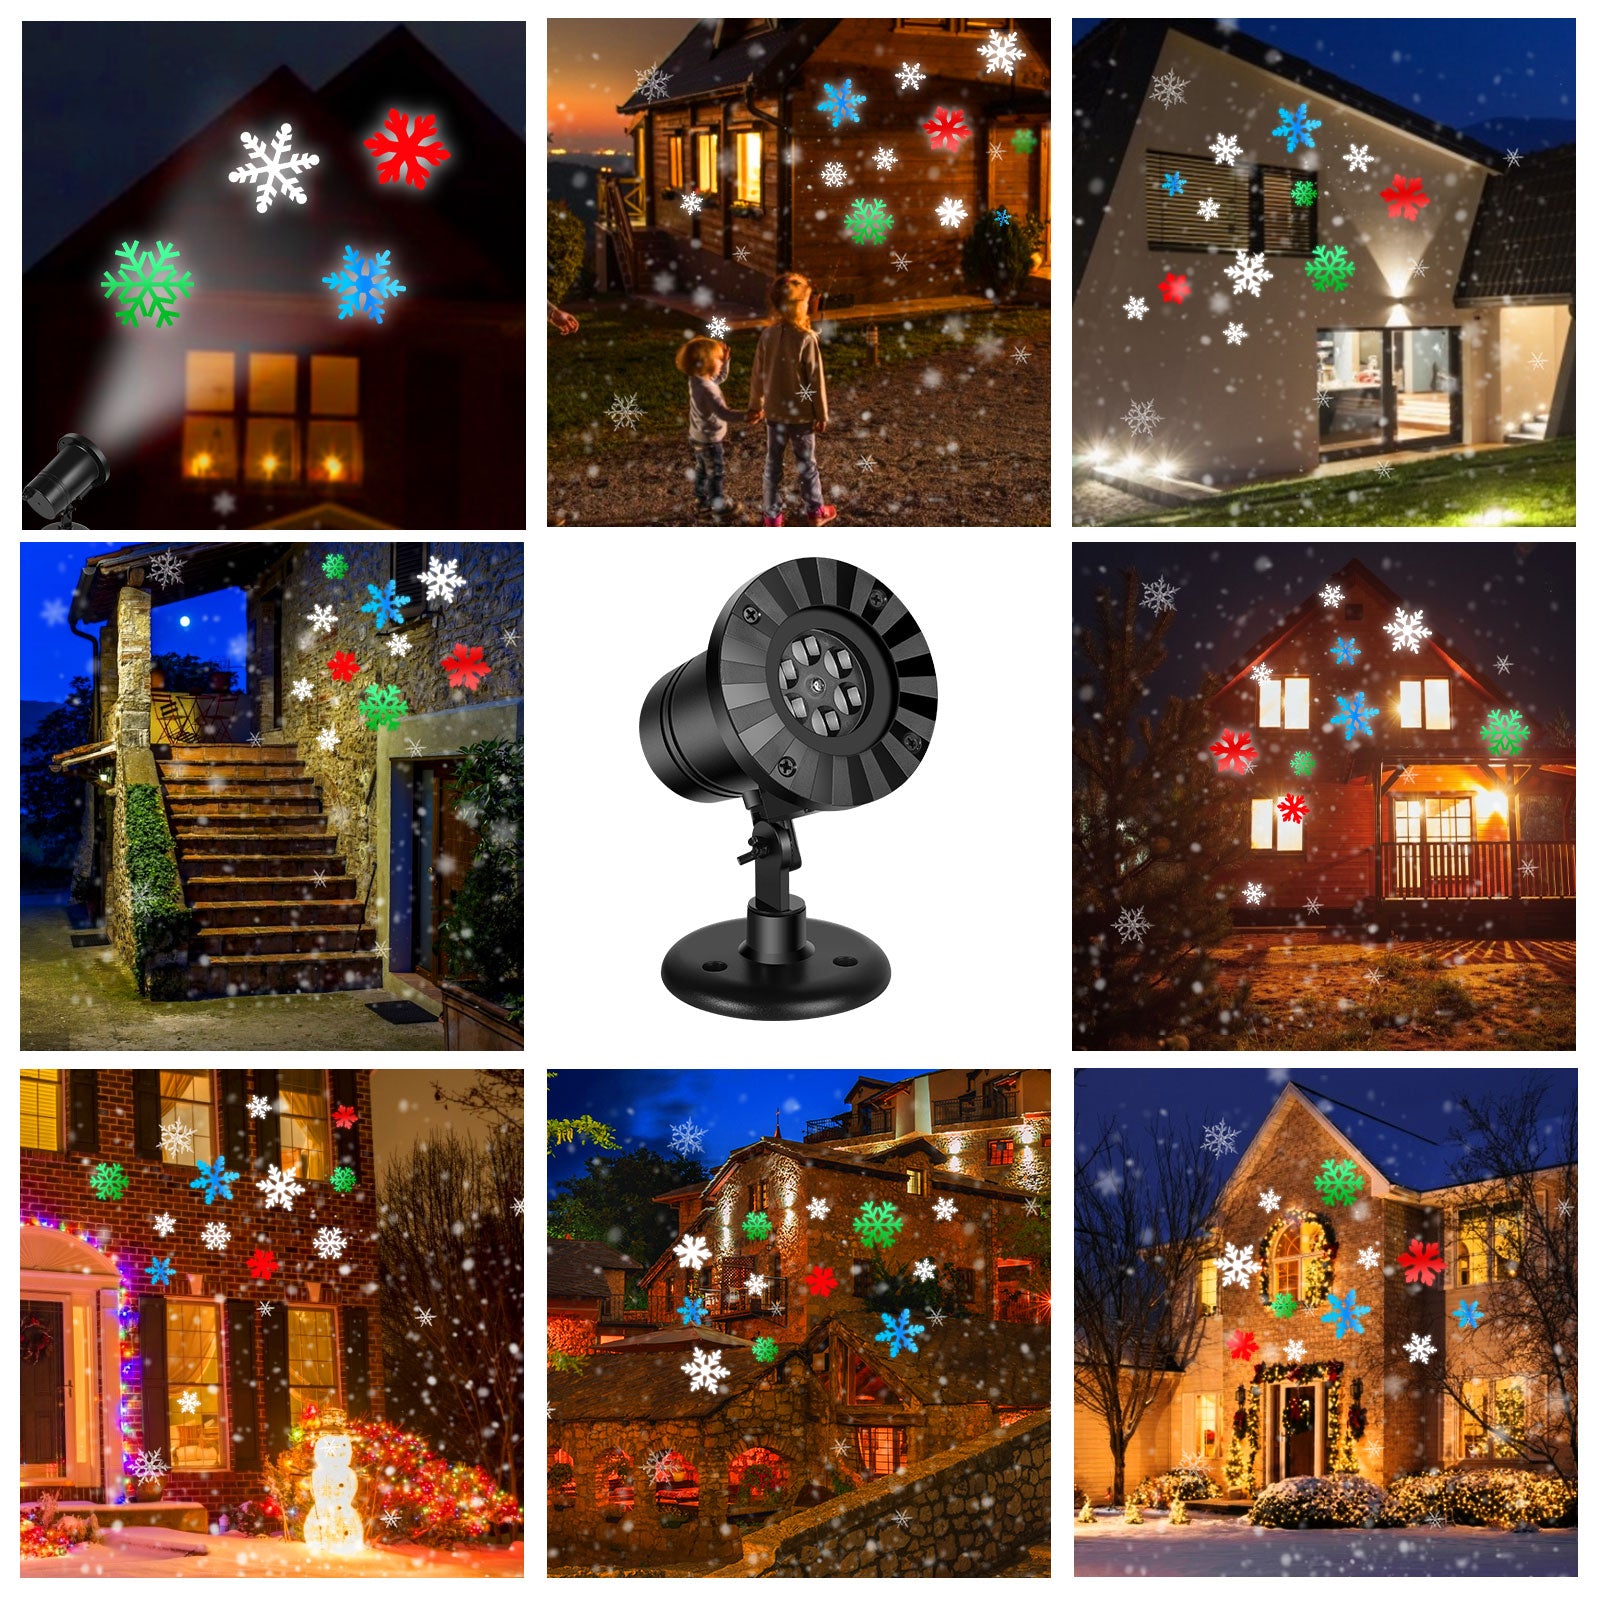 Halloween Christmas Projector Lights Outdoor Moving Snowflake Lights Waterproof for Holiday Party Garden Wedding Indoor Outdoor Decorations, Color /White Snowflake